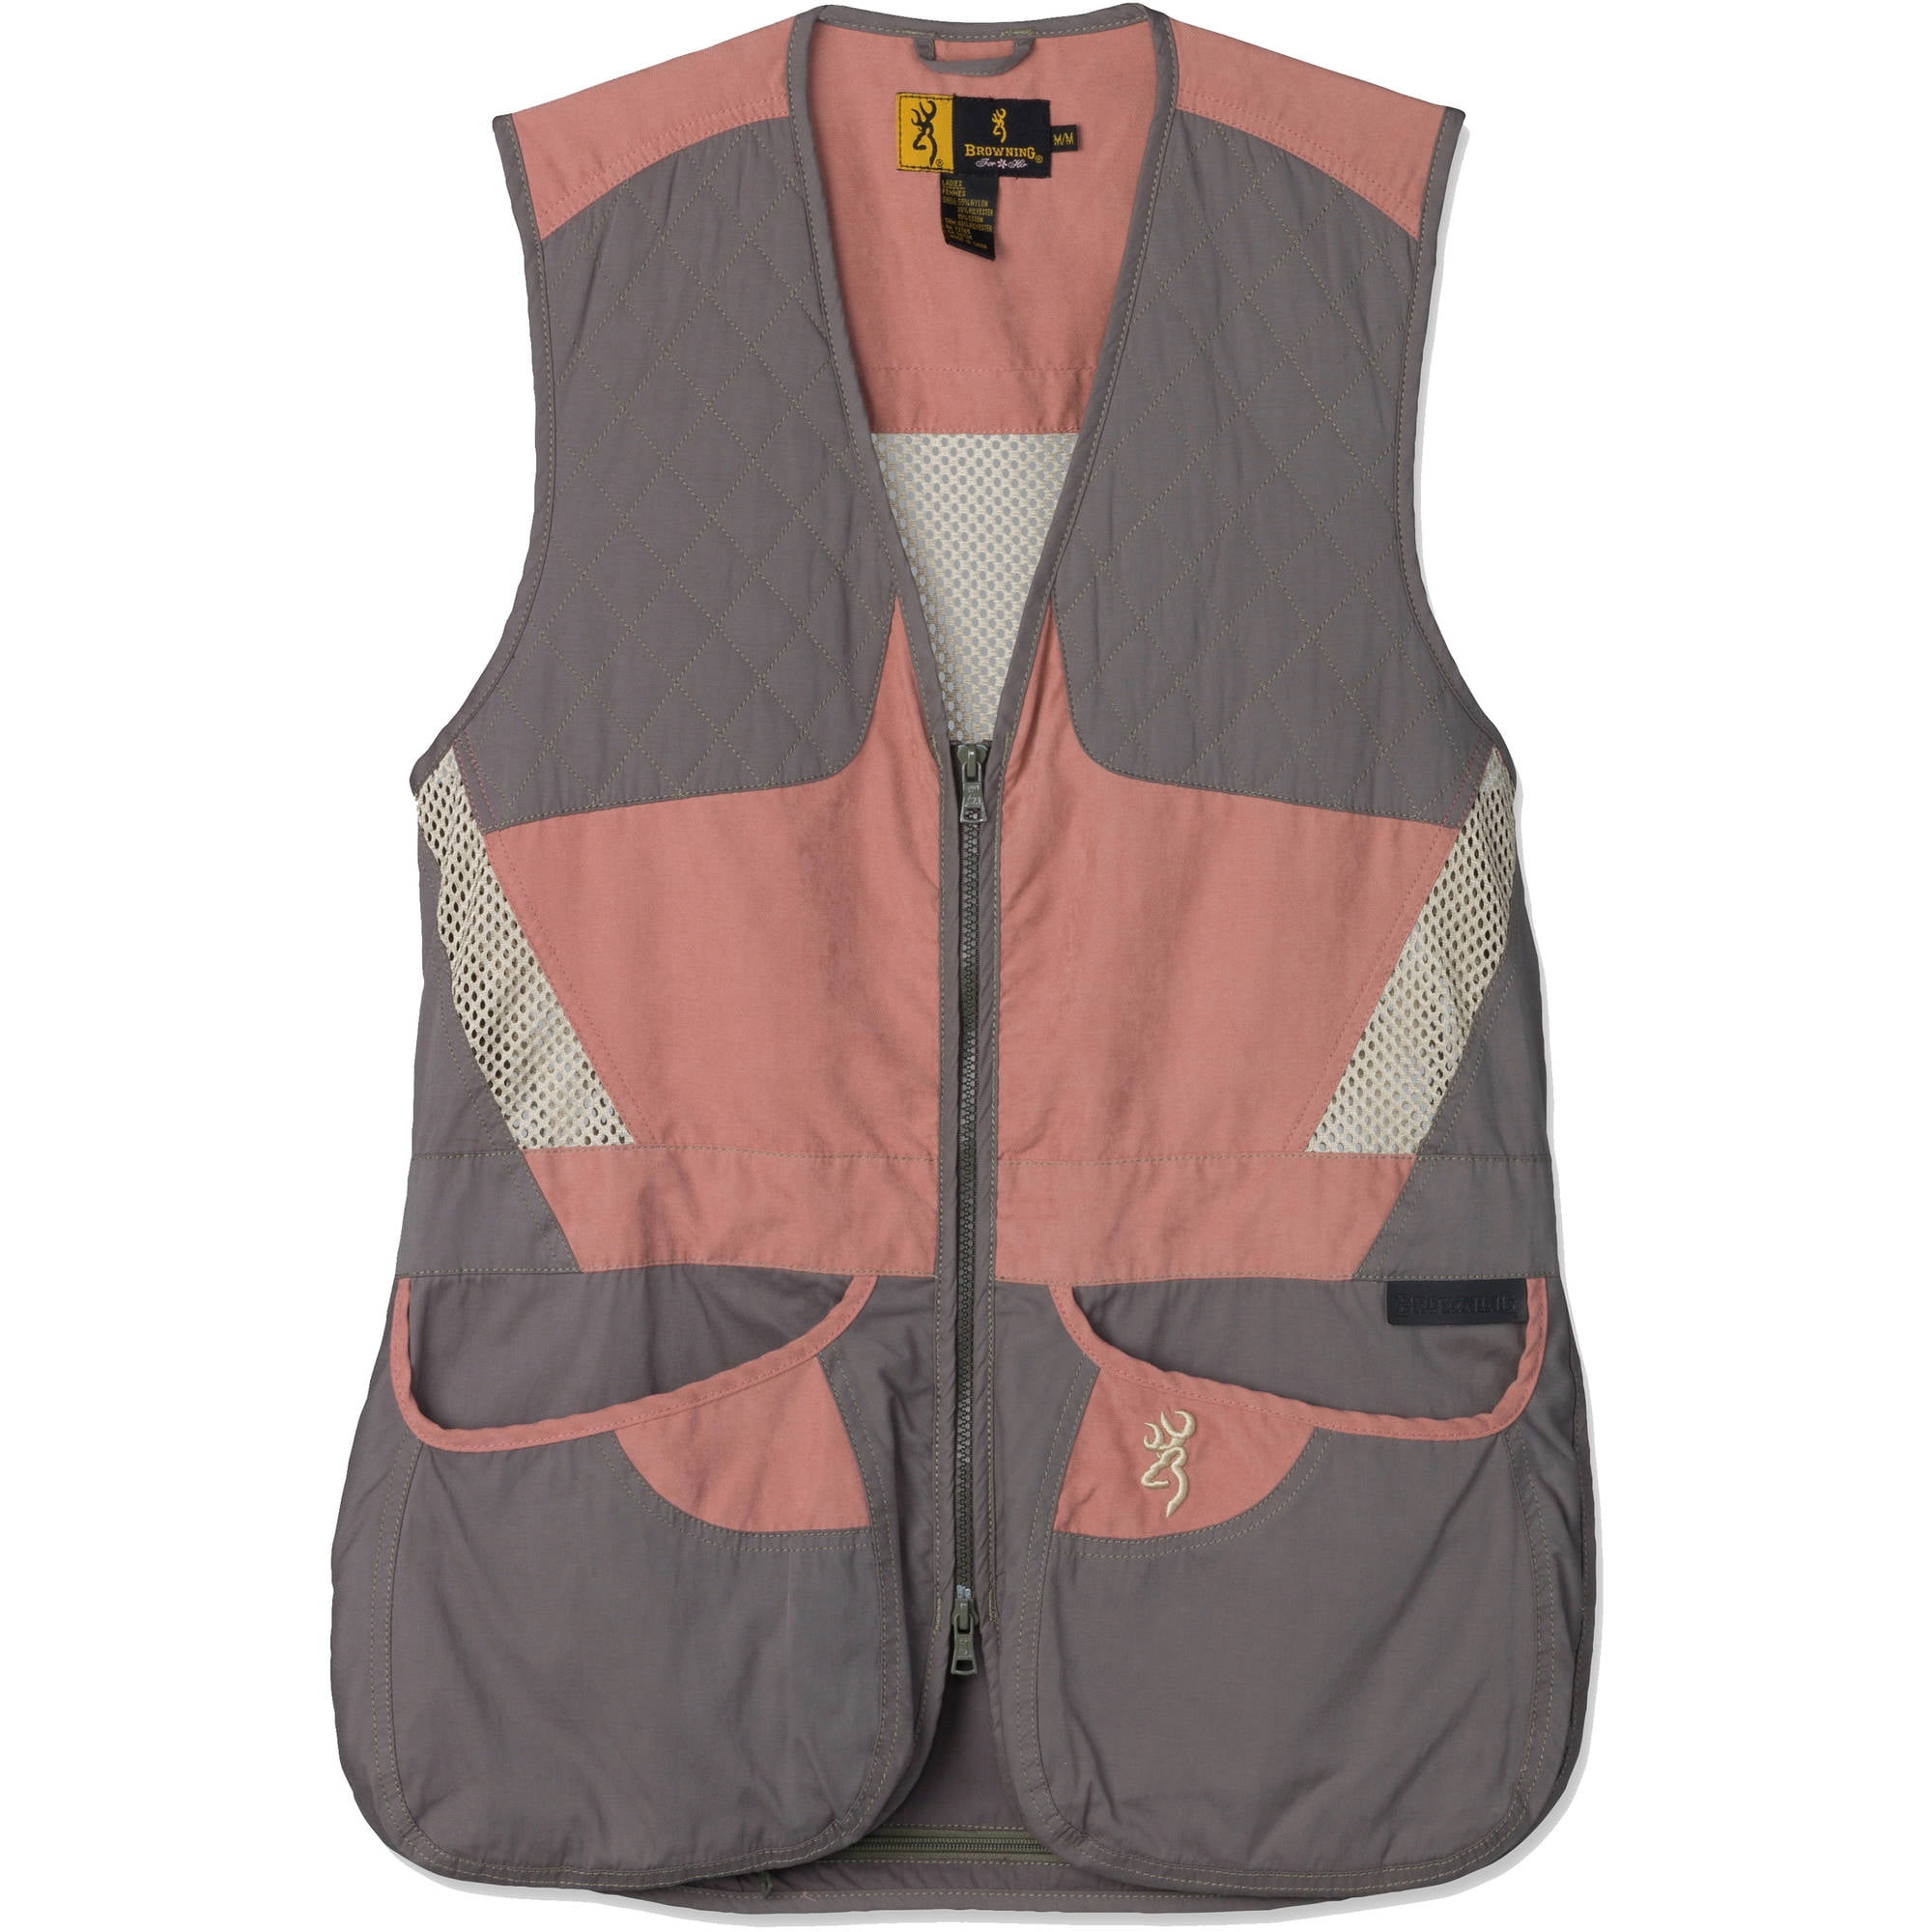 Womens shooting vest highest silver price per ounce